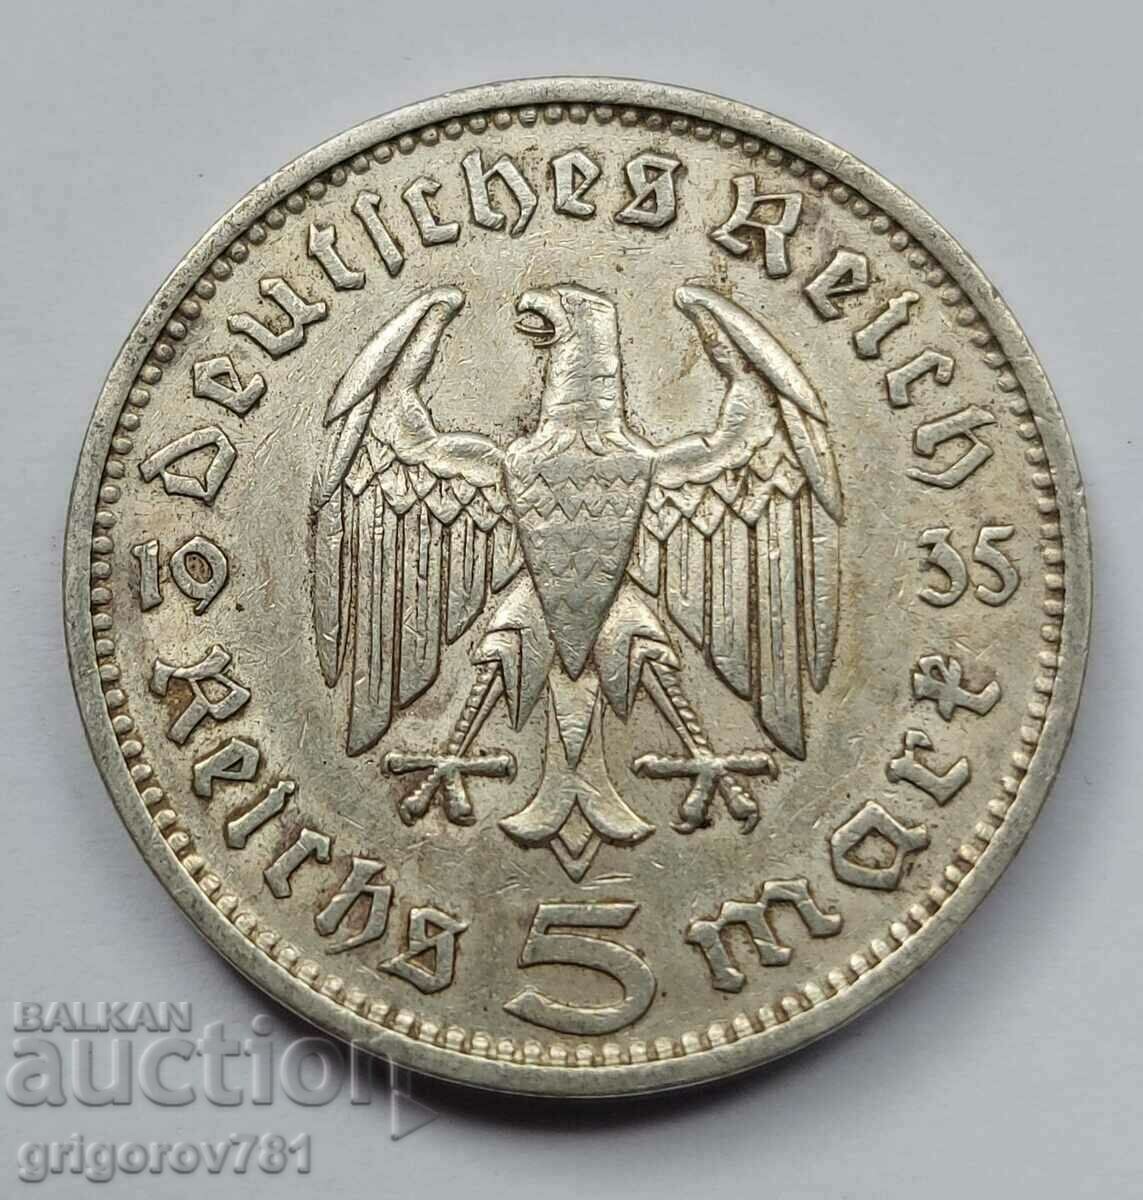 5 Mark Silver Germany 1935 F III Reich Silver Coin #70